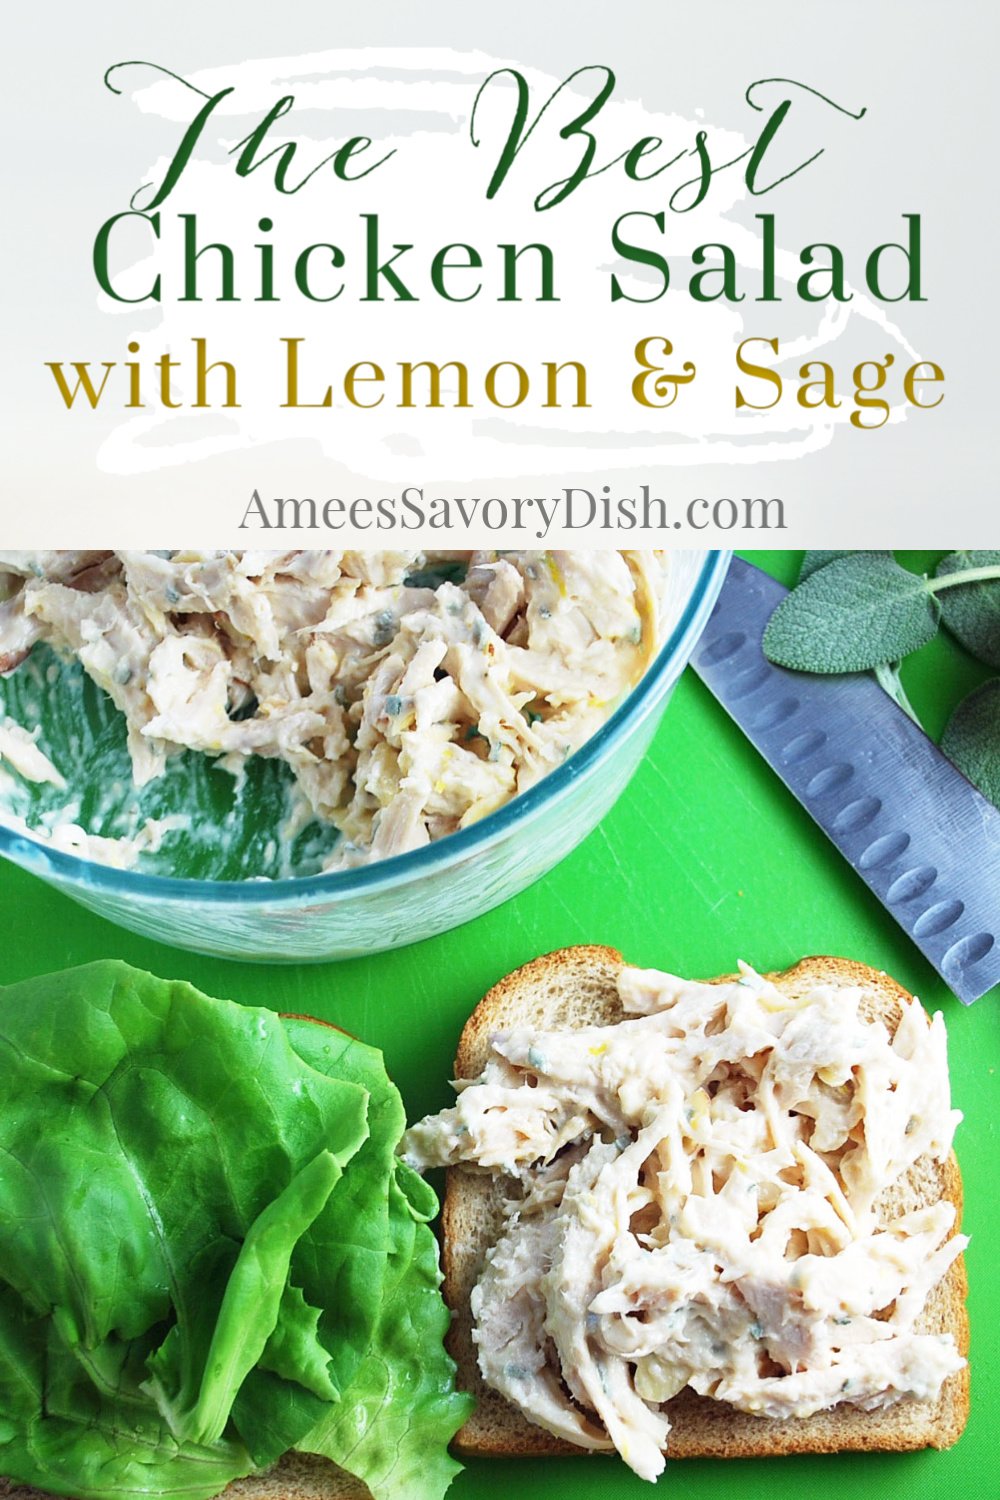 This flavorful lemon sage chicken salad recipe is fast and easy to make using pre-cooked shredded chicken, fresh lemon juice, slivered almonds, and chopped fresh sage leaves.  via @Ameessavorydish